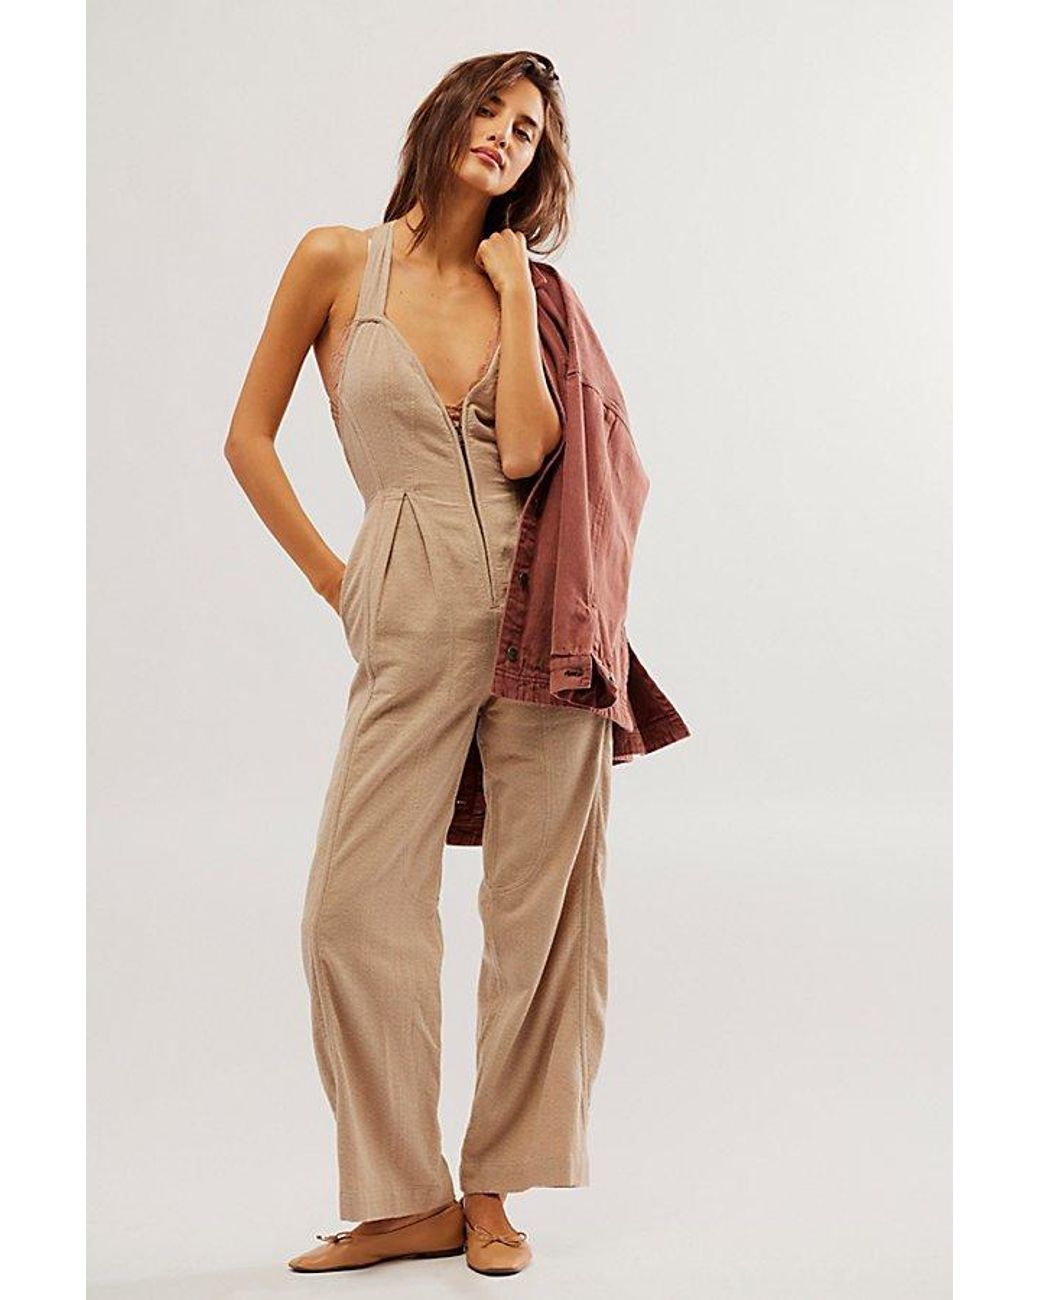 https://cdna.lystit.com/1040/1300/n/photos/freepeople/d898e0a5/free-people-Oat-Combo-What-I-Want-One-piece.jpeg